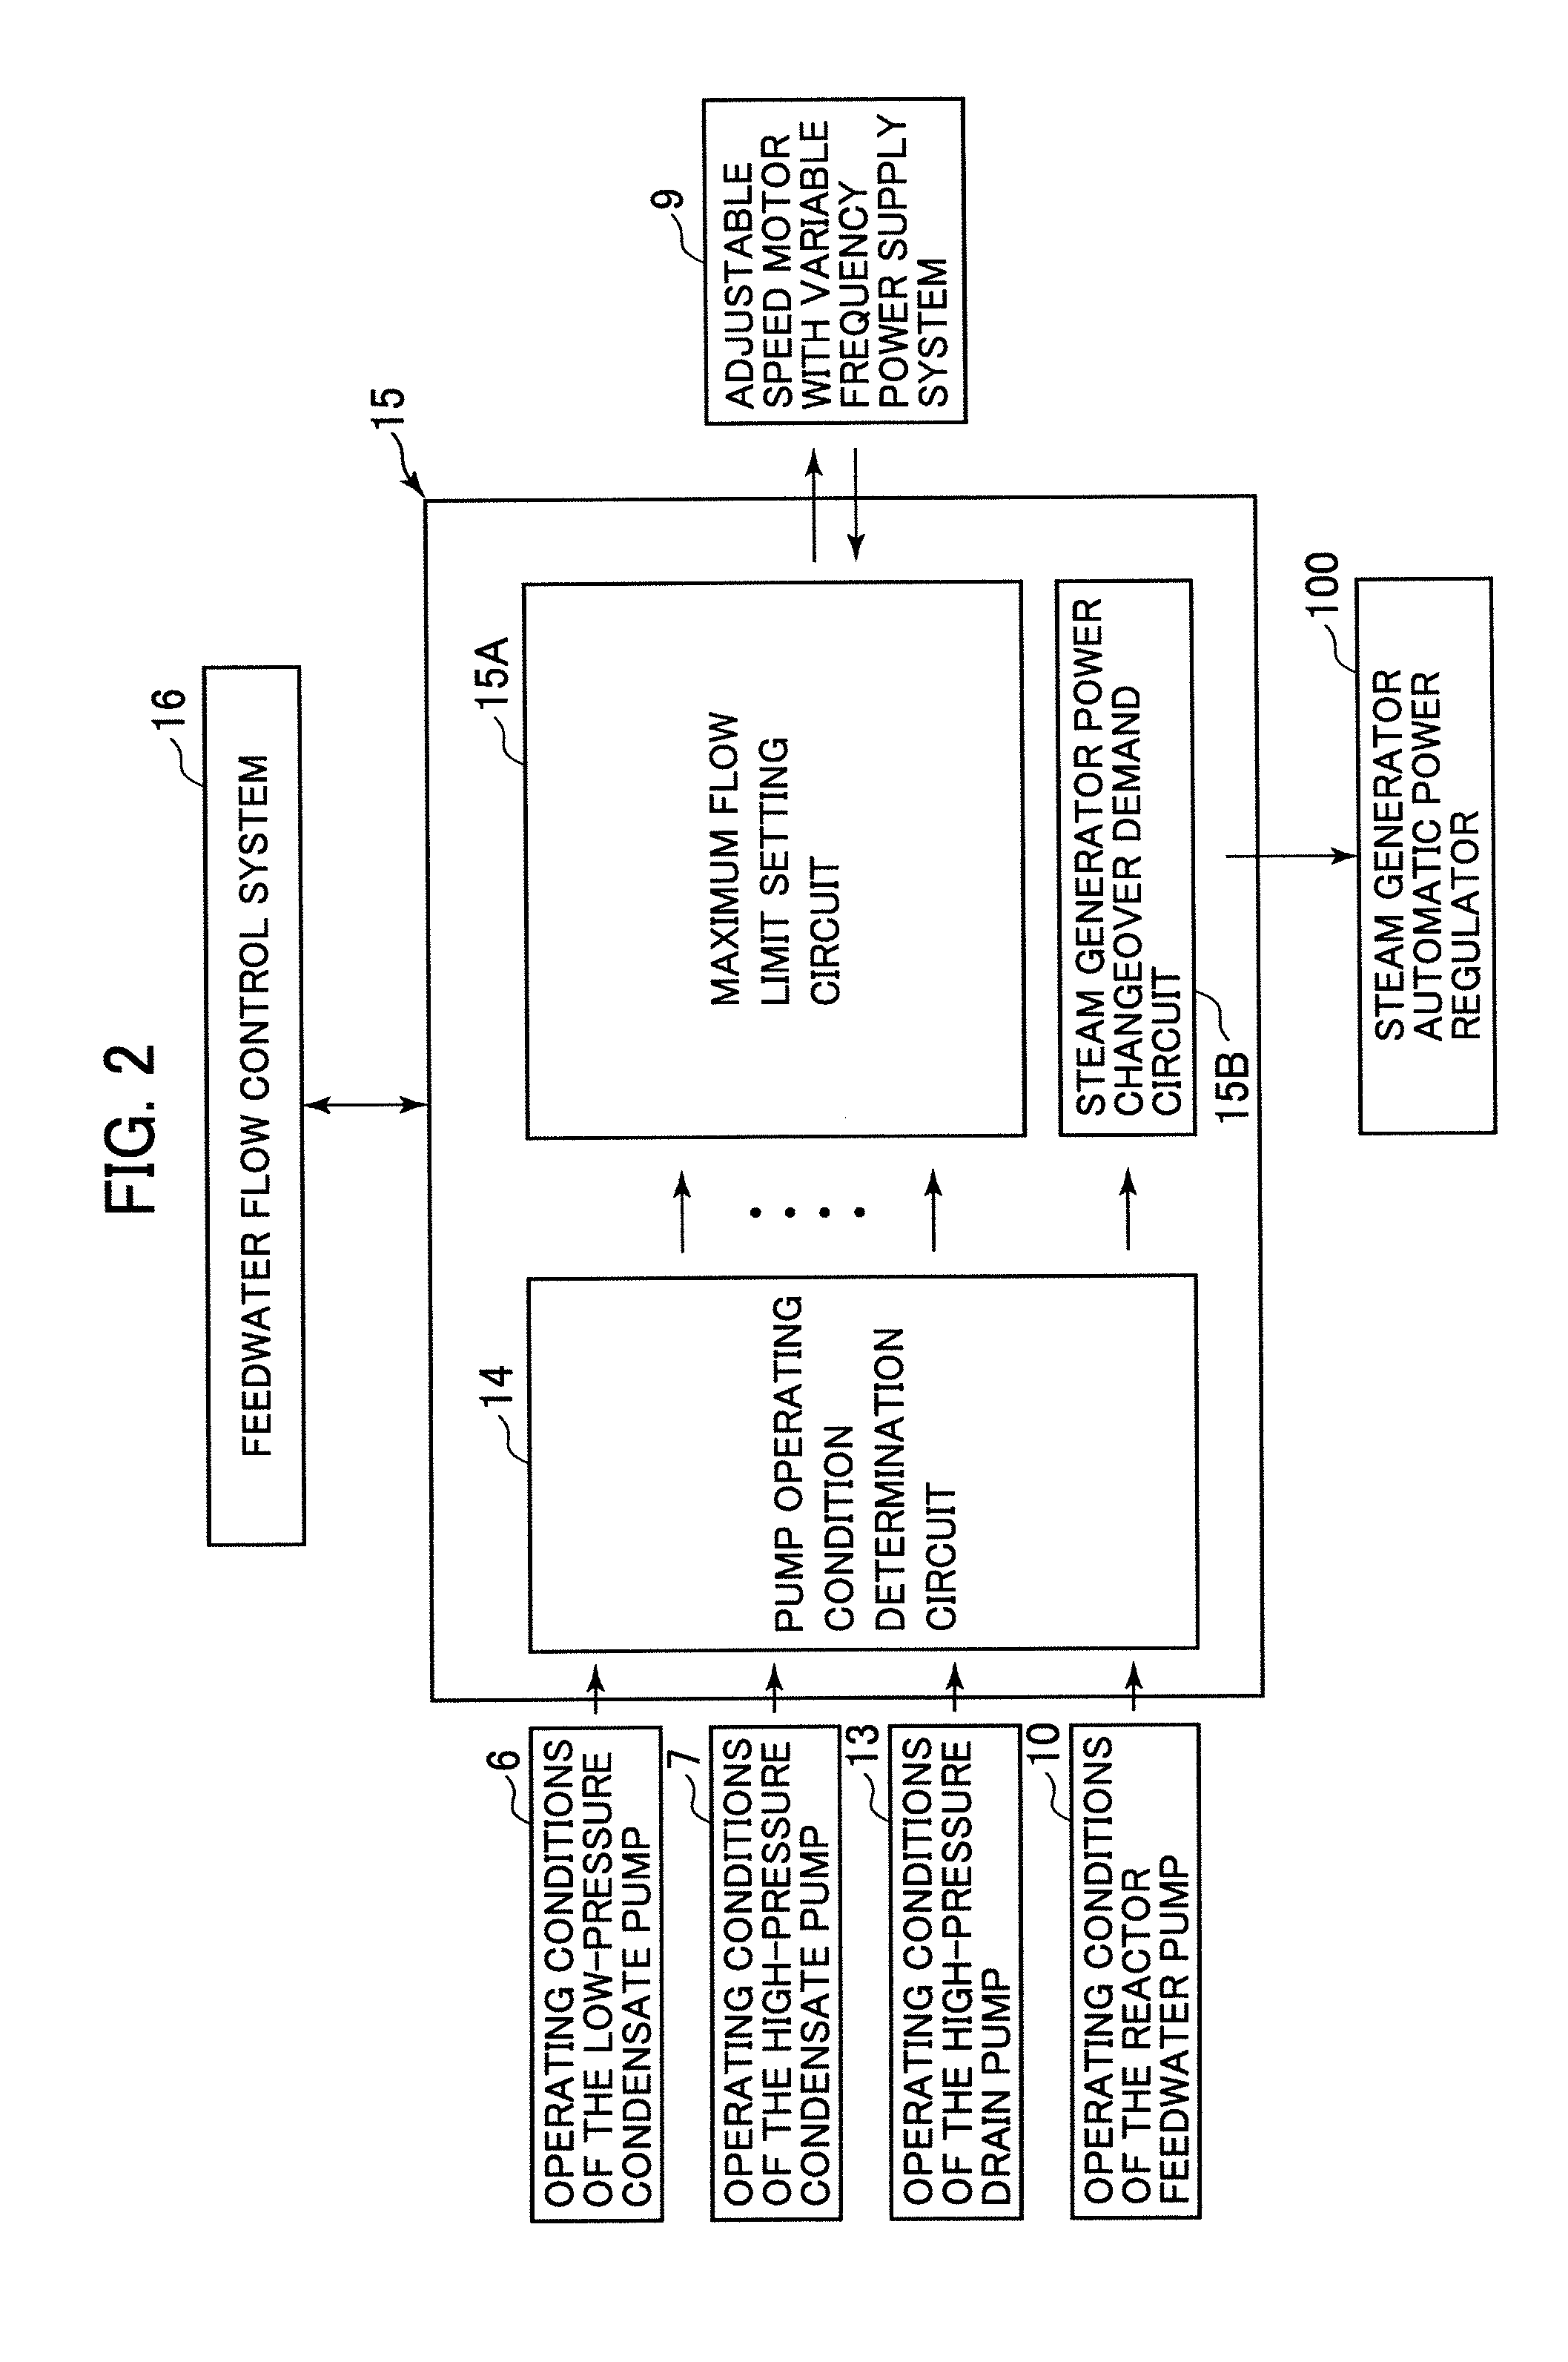 Reactor Feedwater Pump Control System